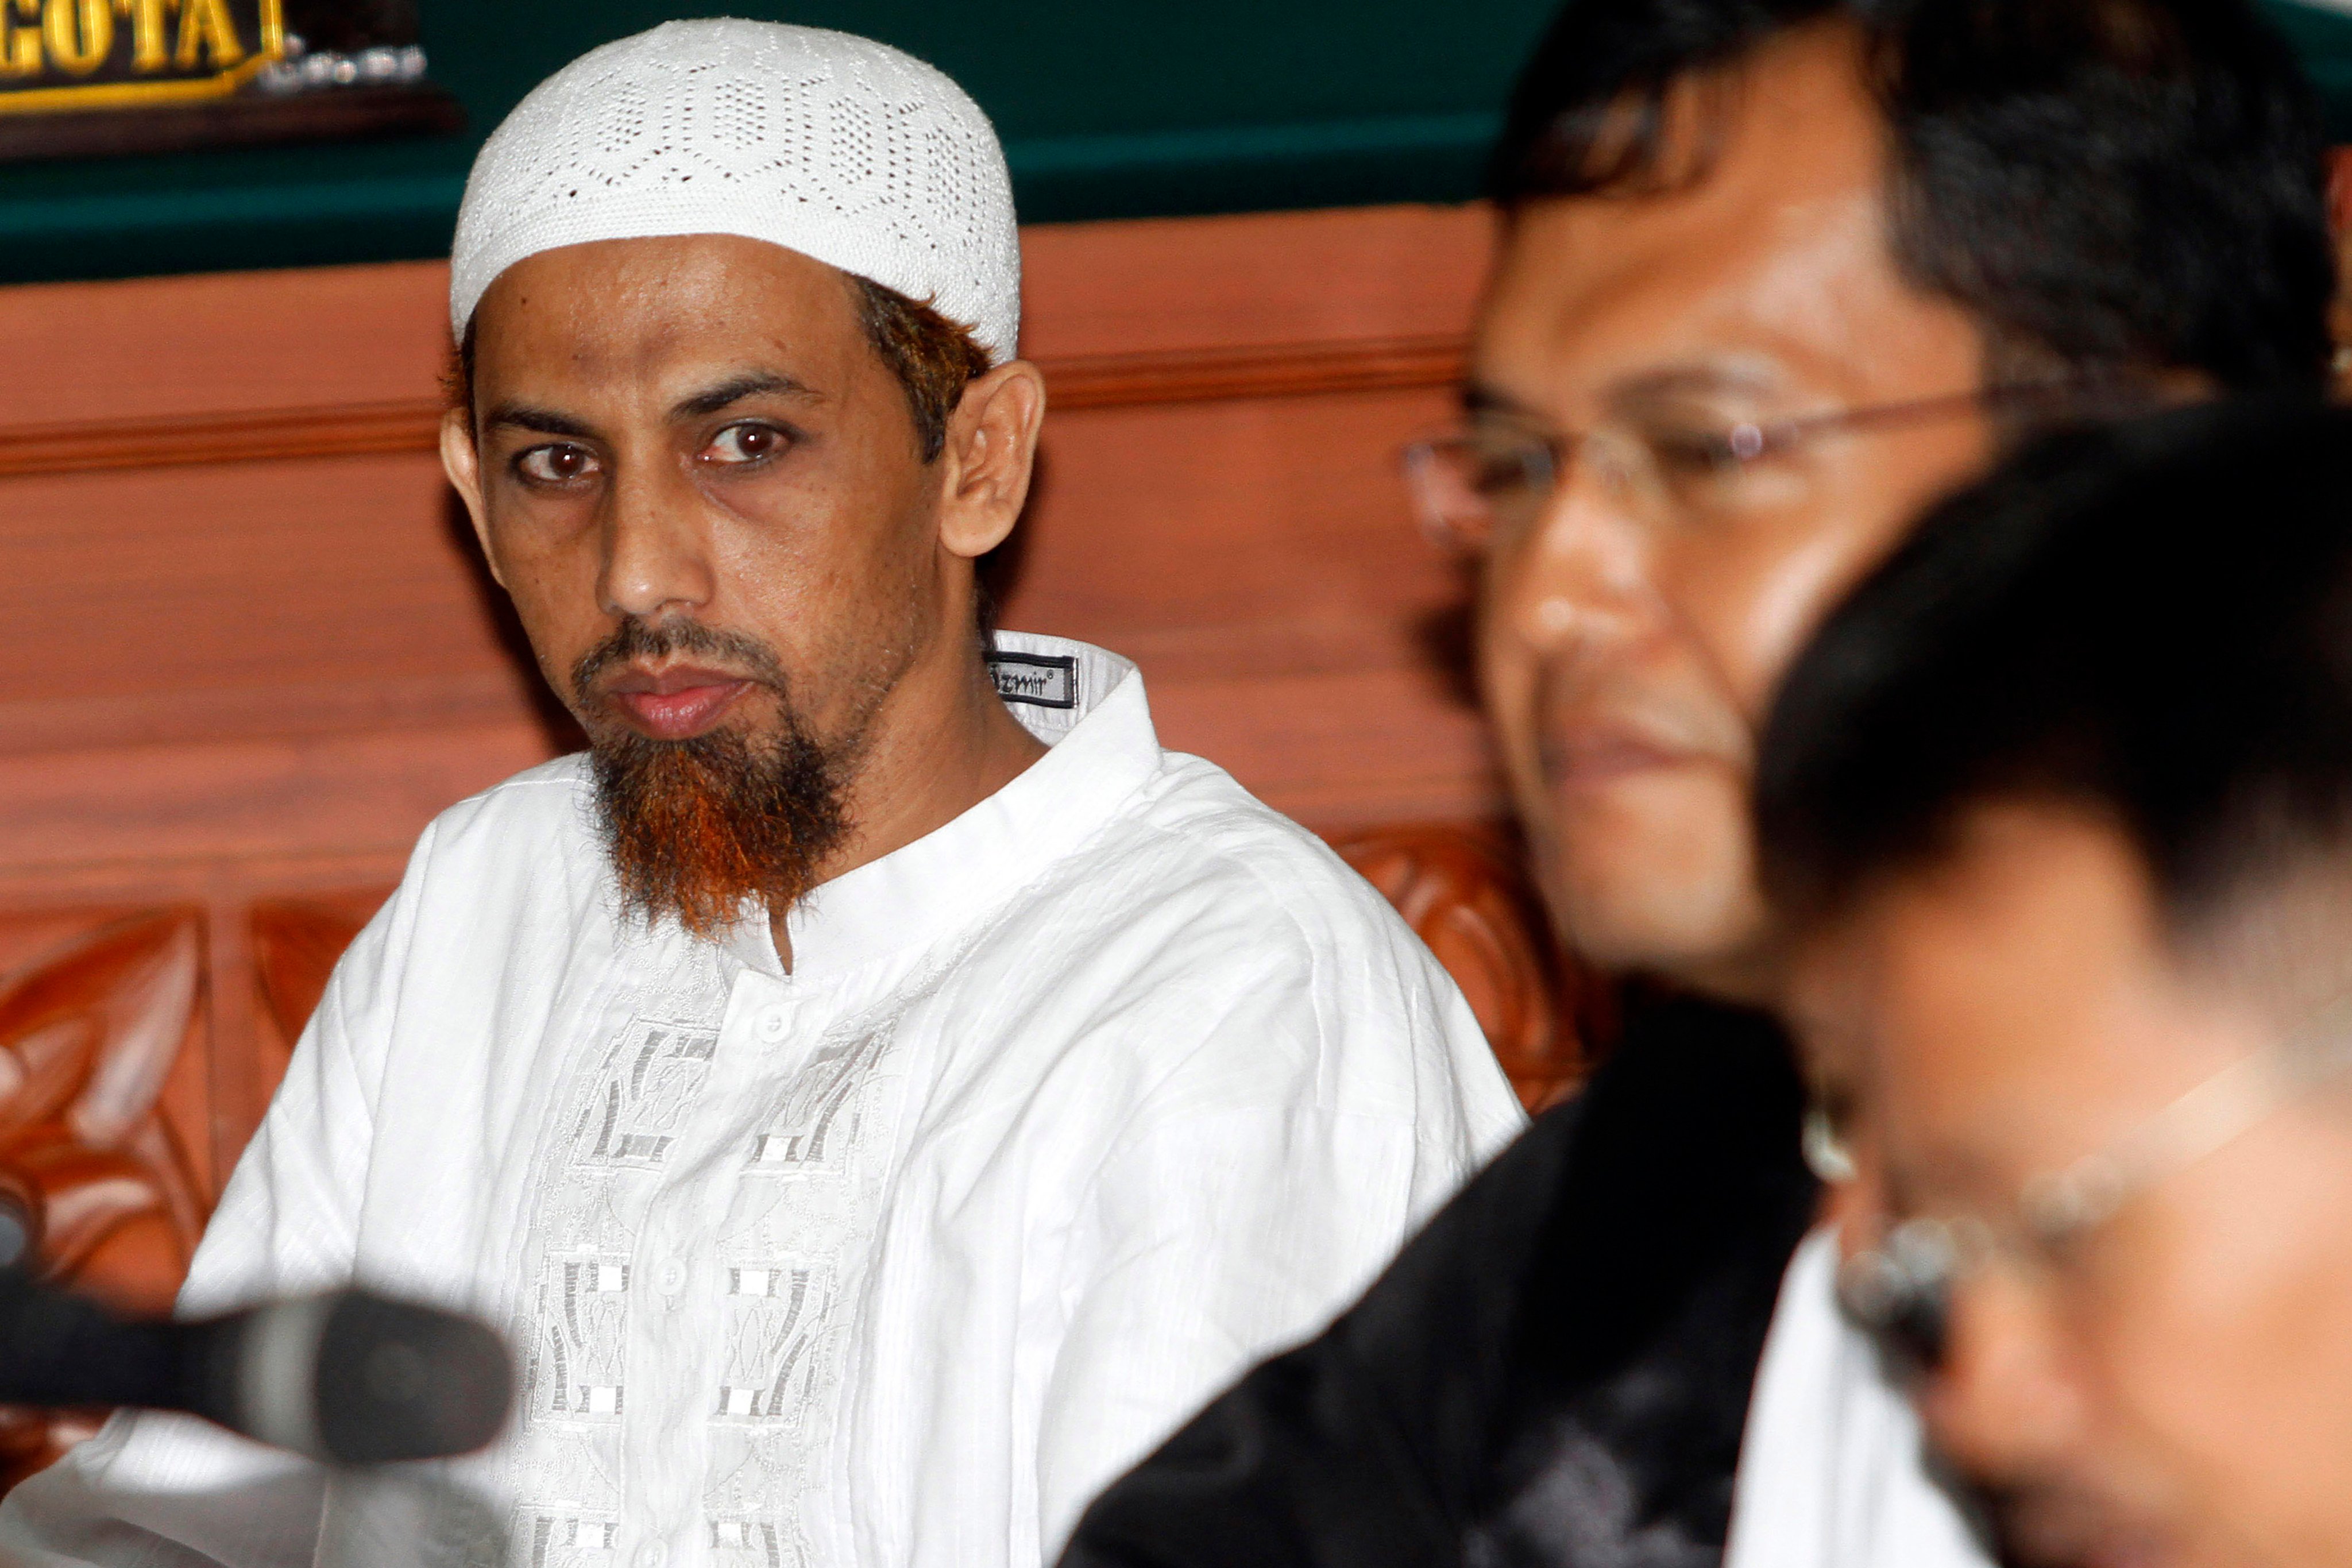 Umar Patek, an Indonesian militant convicted in 2012 for the 2002 Bali terrorist attacks, in court during his trial. He could soon be released from prison. File photo: AP